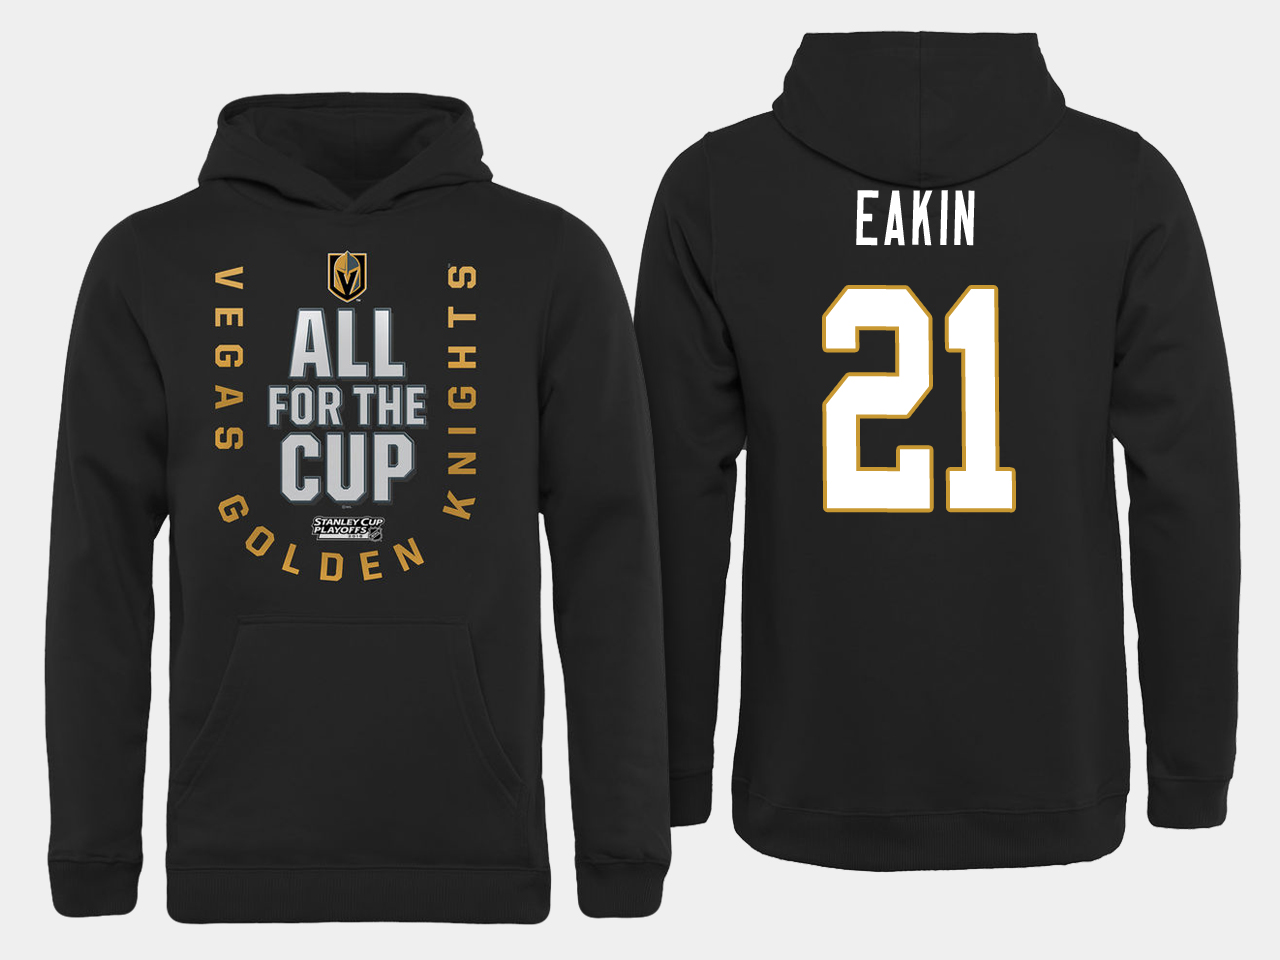 Men NHL Vegas Golden Knights #21 Eakin All for the Cup hoodie->more nhl jerseys->NHL Jersey